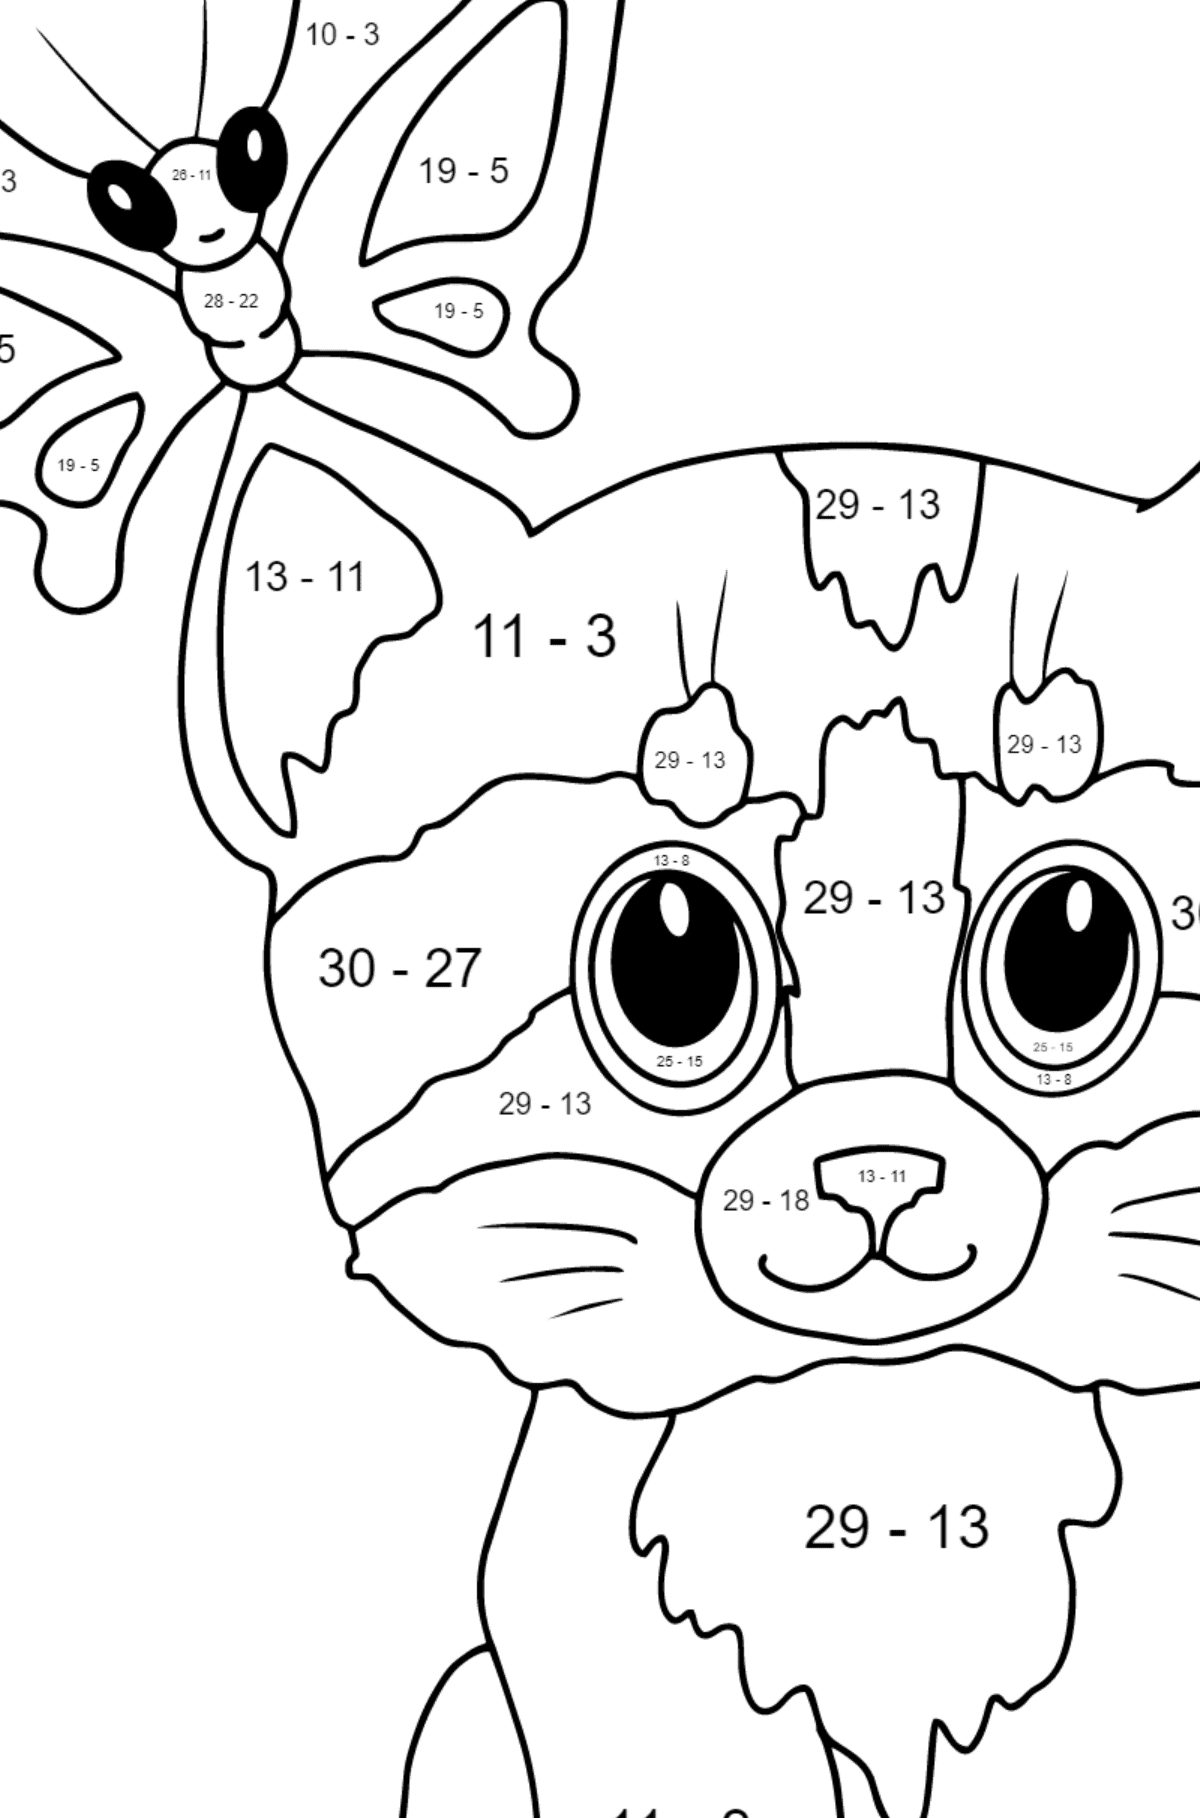 Gentle Kitten coloring page - Math Coloring - Subtraction for Kids